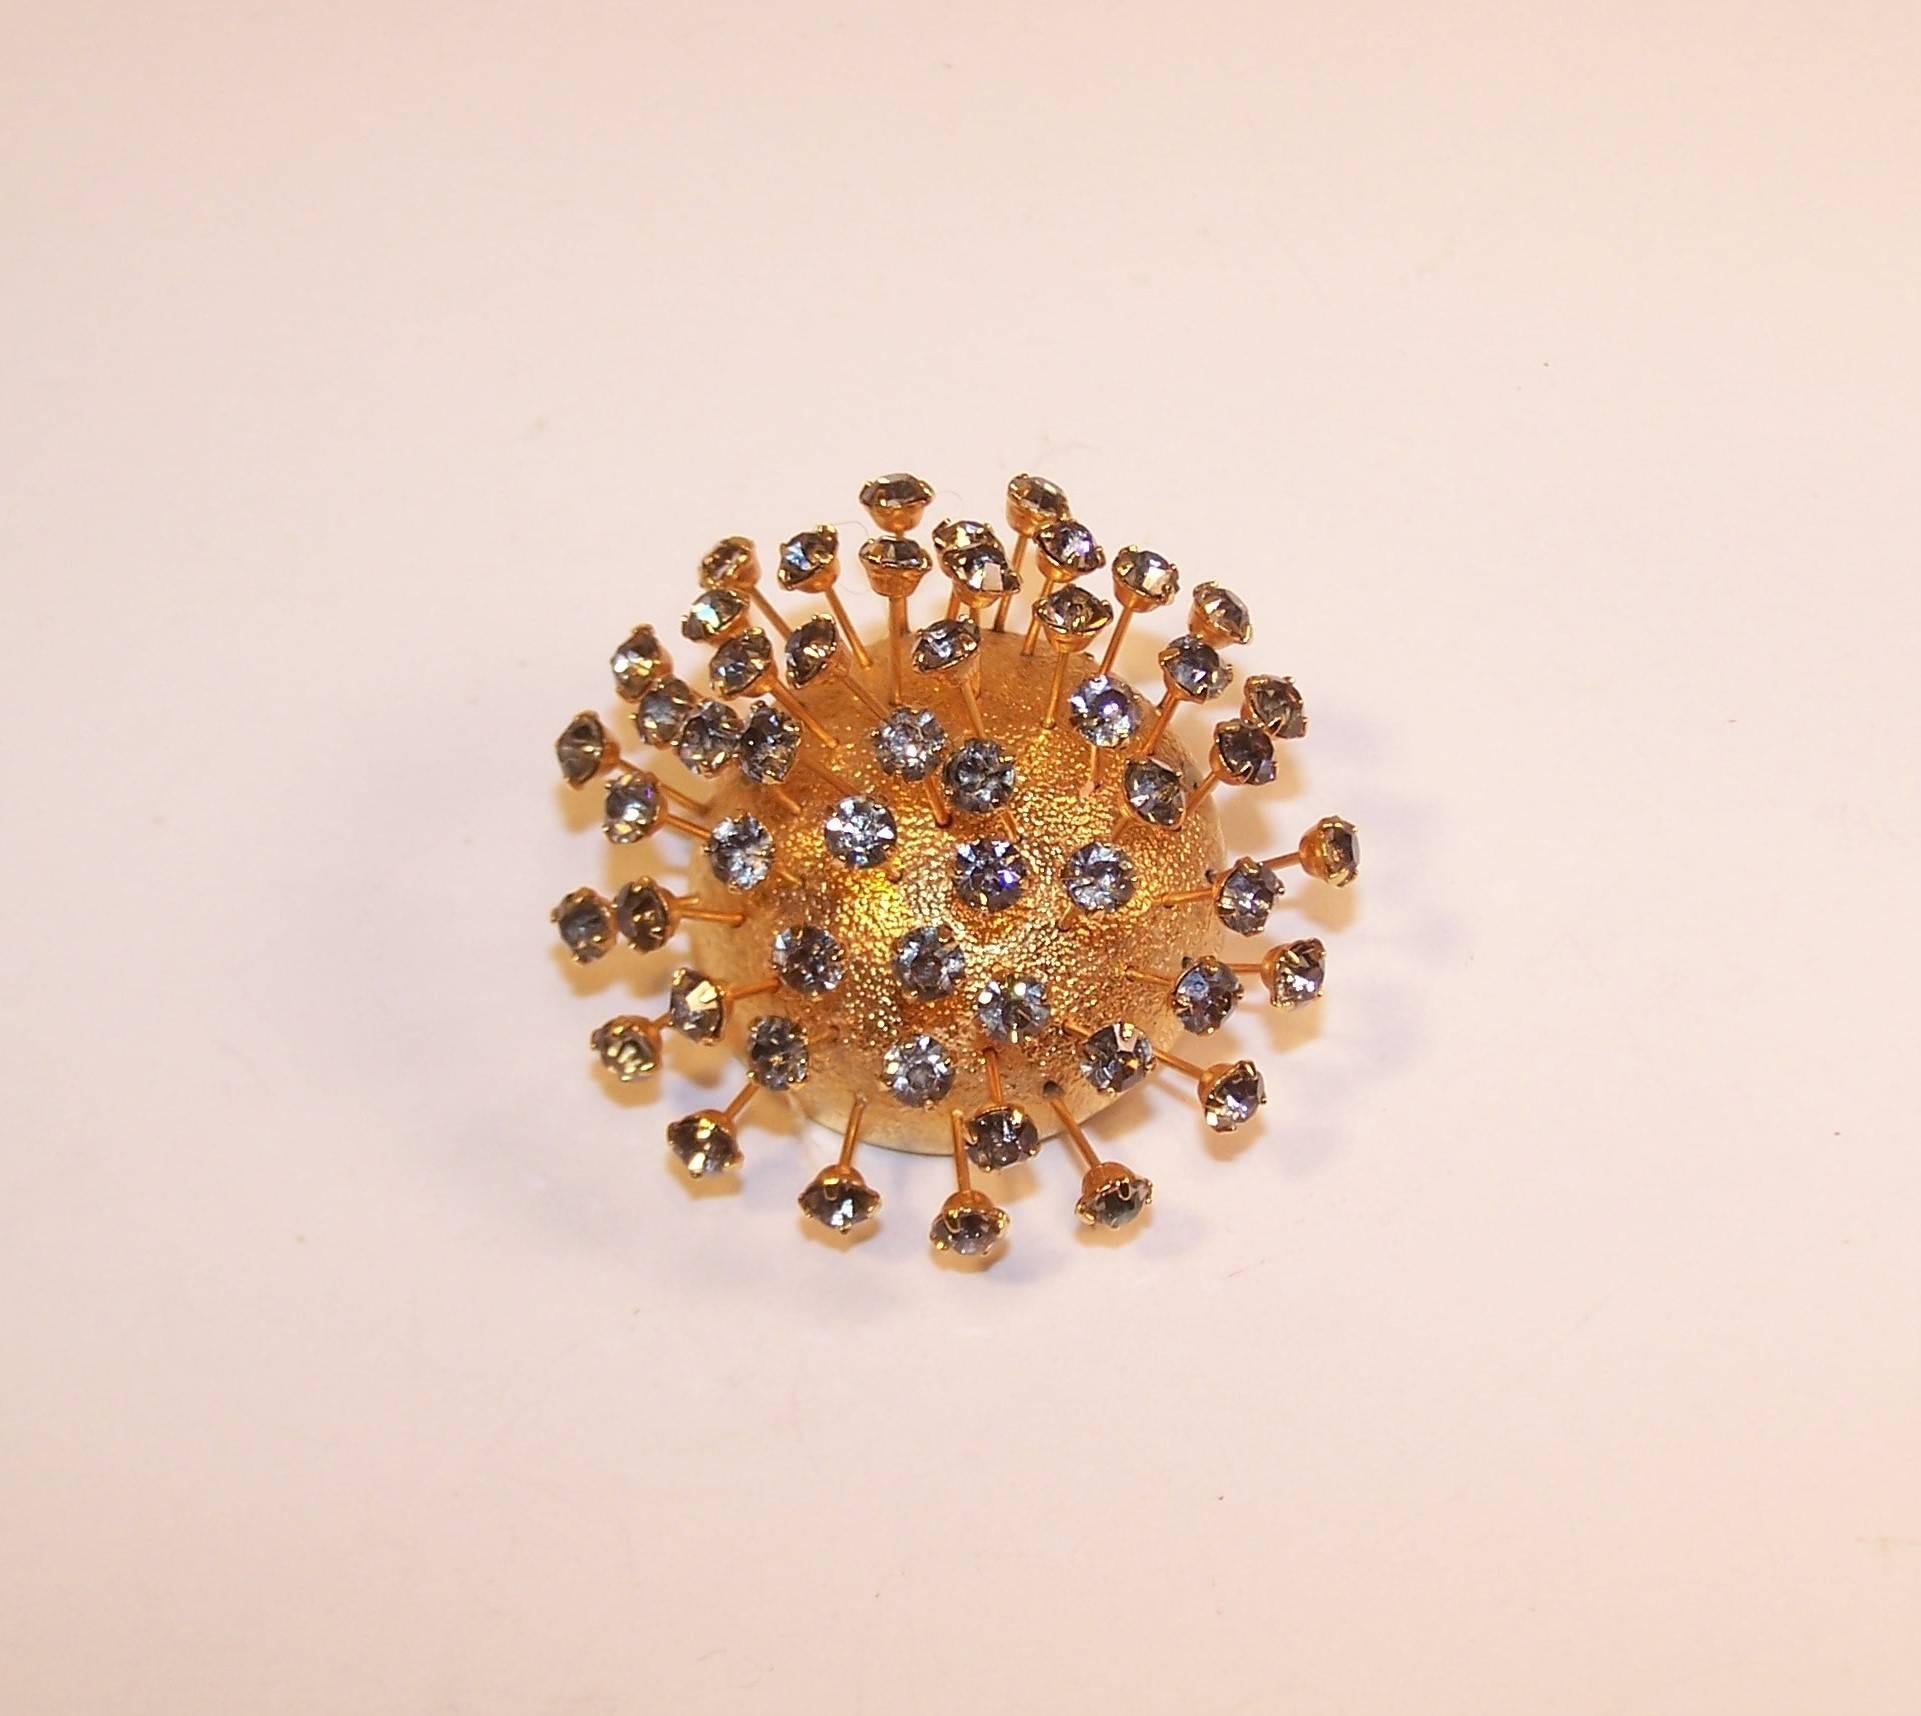 This sputnik style brooch by Corocraft of the Coro Jewelry Company has space age style with timeless elegance.  The gold tone metal base is textured to serve as the perfect background for rhinestone tipped rods that 'tremble' to create movement and